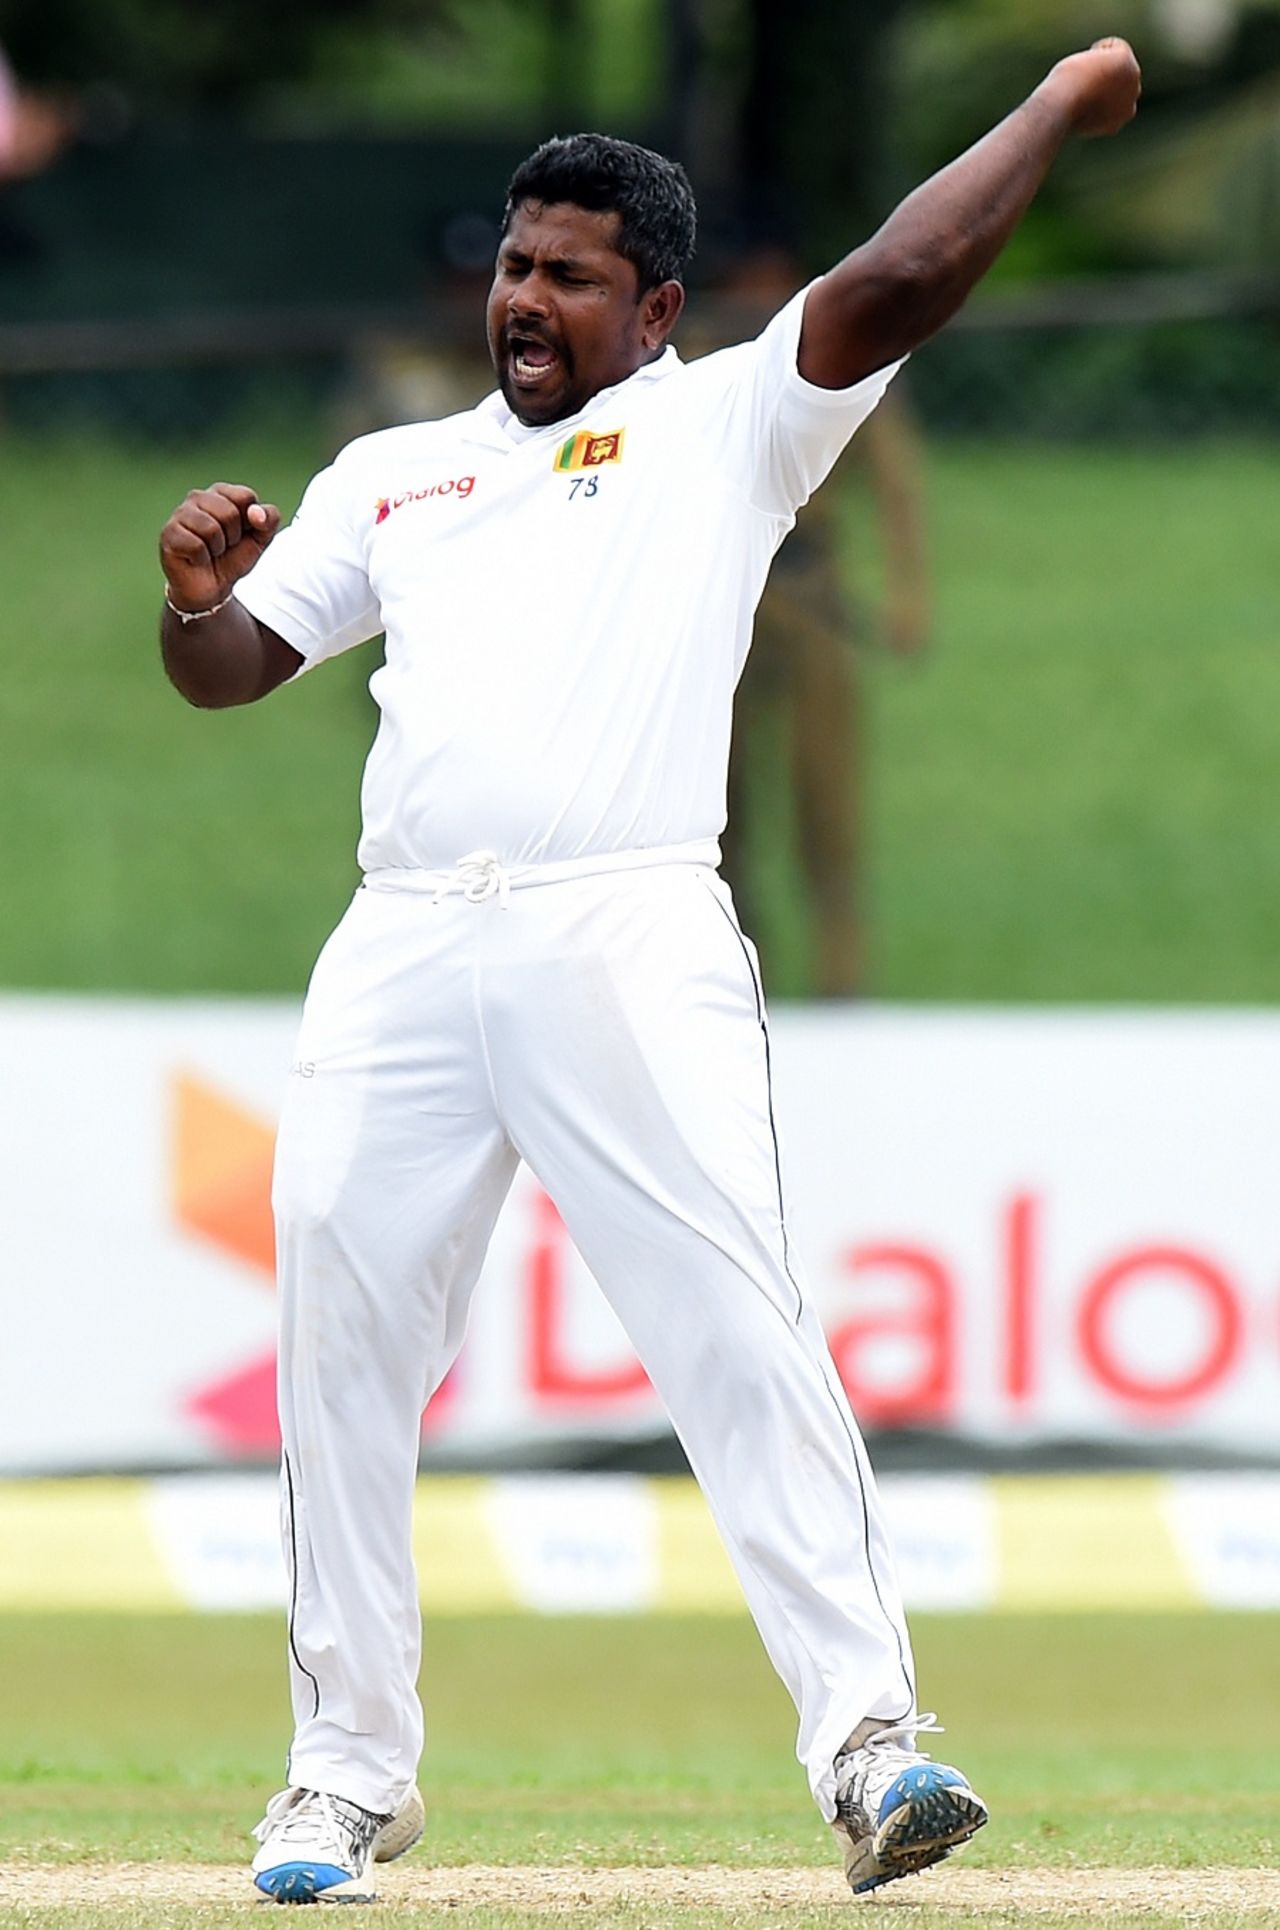 Rangana Herath roars after taking a wicket, Sri Lanka v West Indies, 2nd Test, P Sara Oval, Colombo, 5th day, October 26, 2015